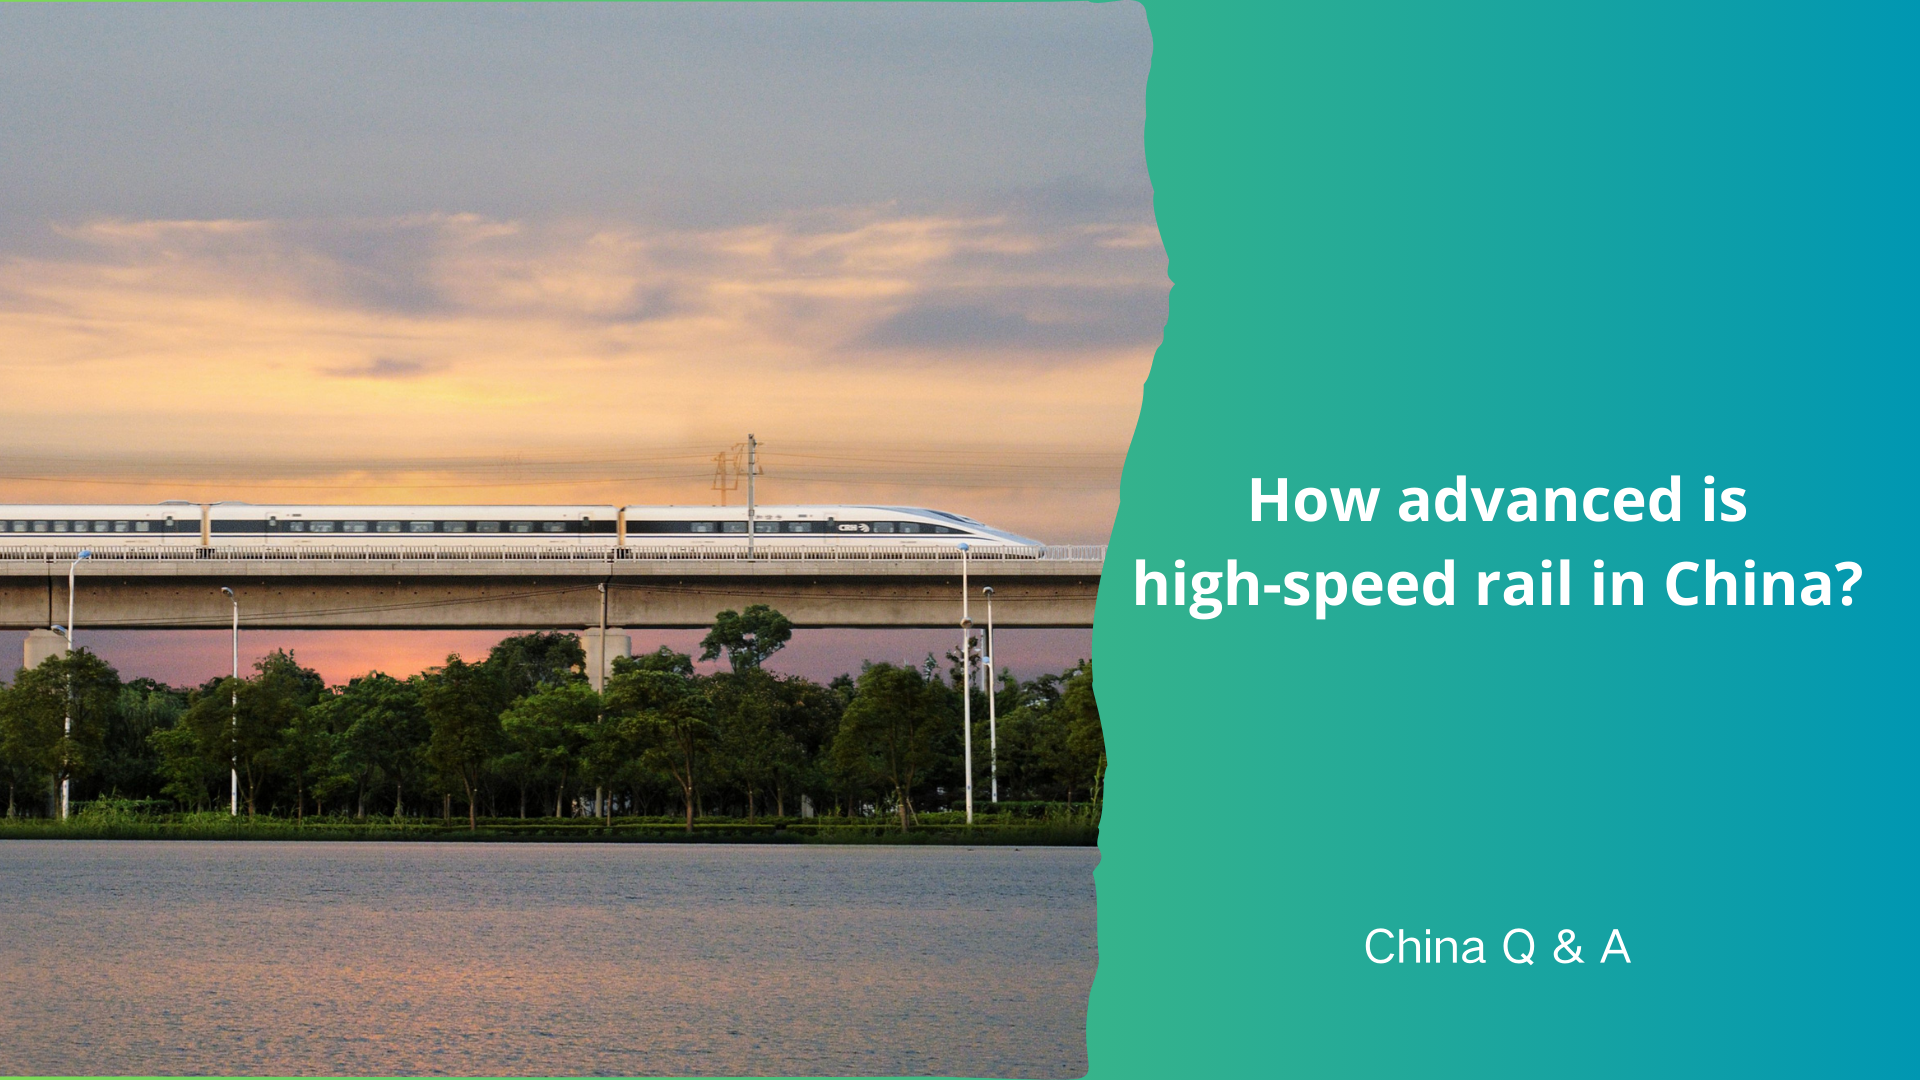 How advanced is high-speed rail in China?